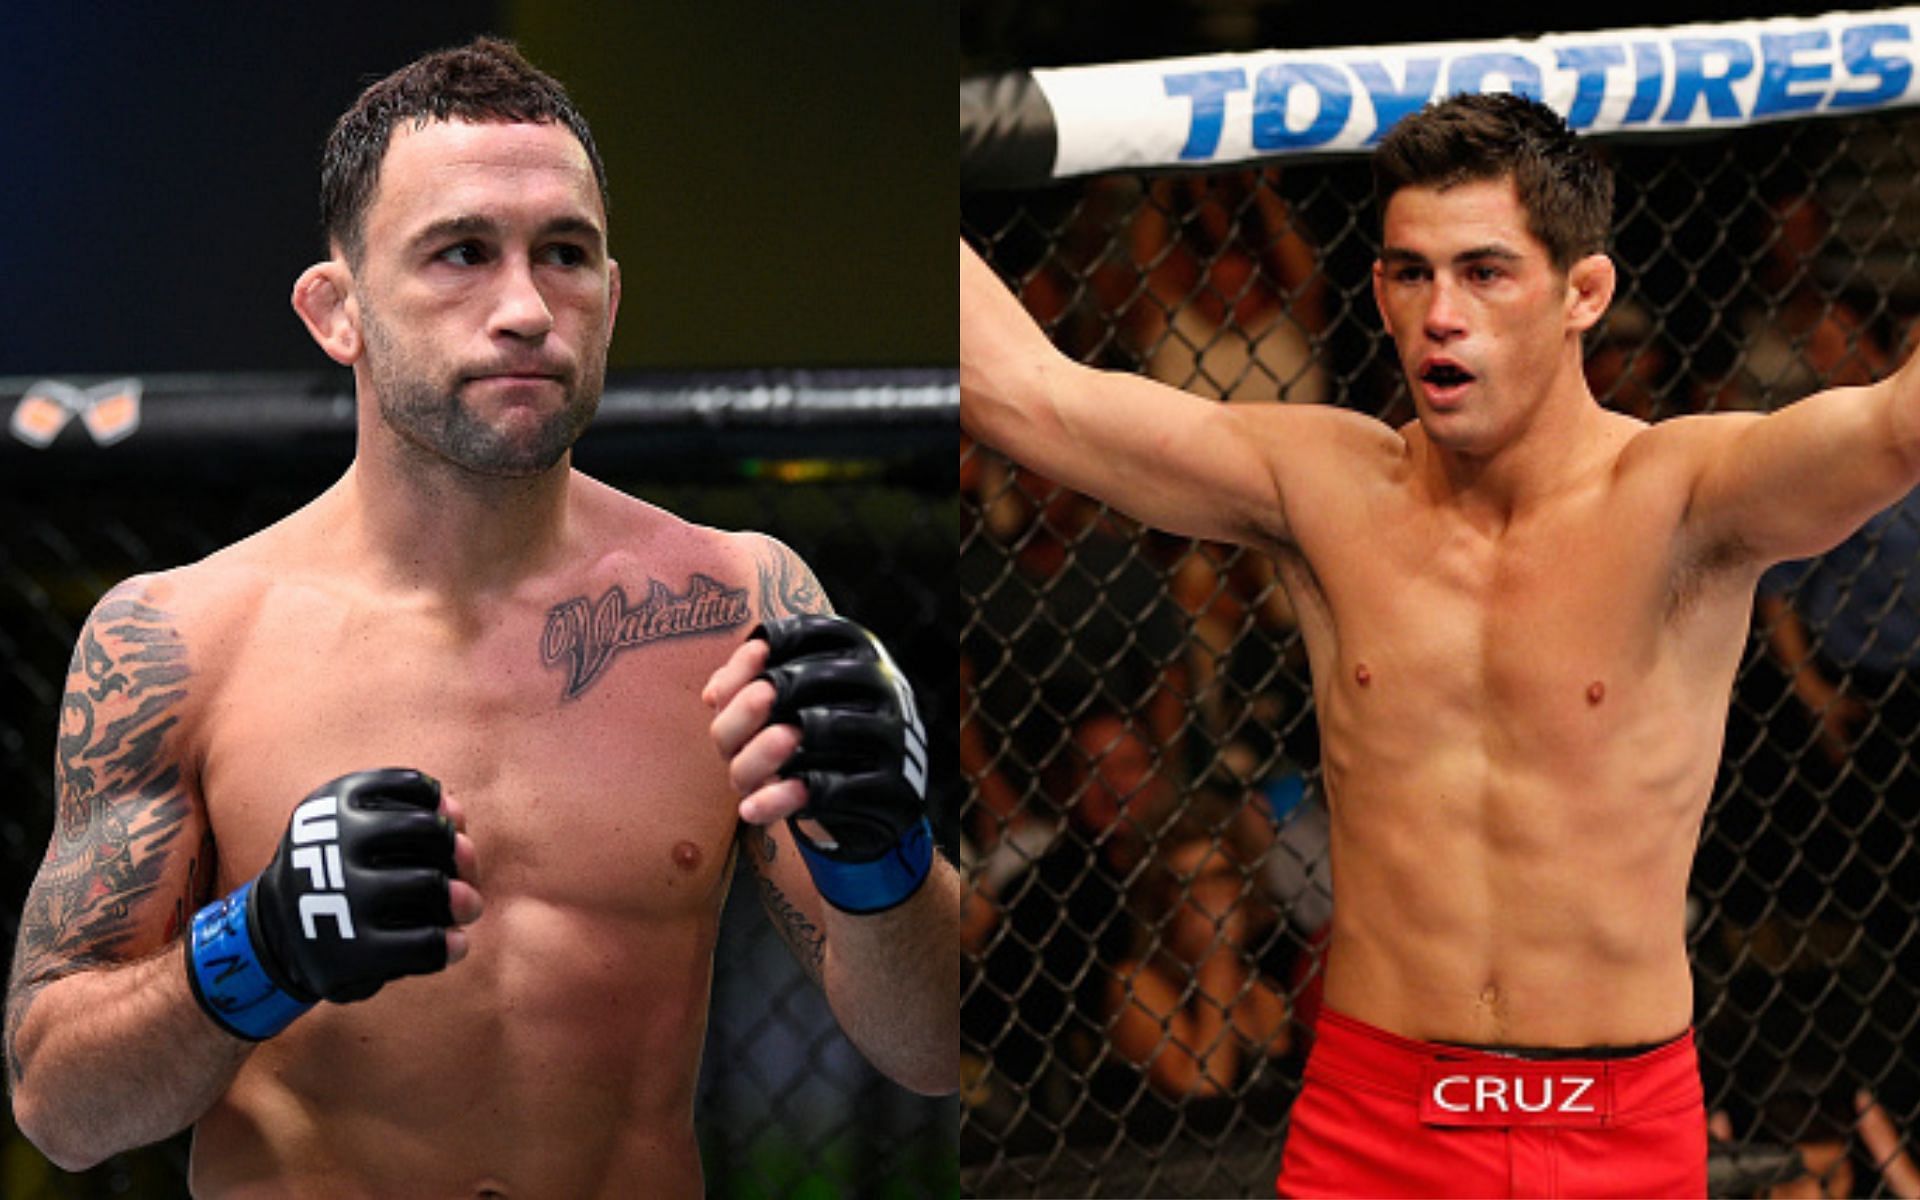 Frankie Edgar (left) and Dominick Cruz (right)(Images via Getty)